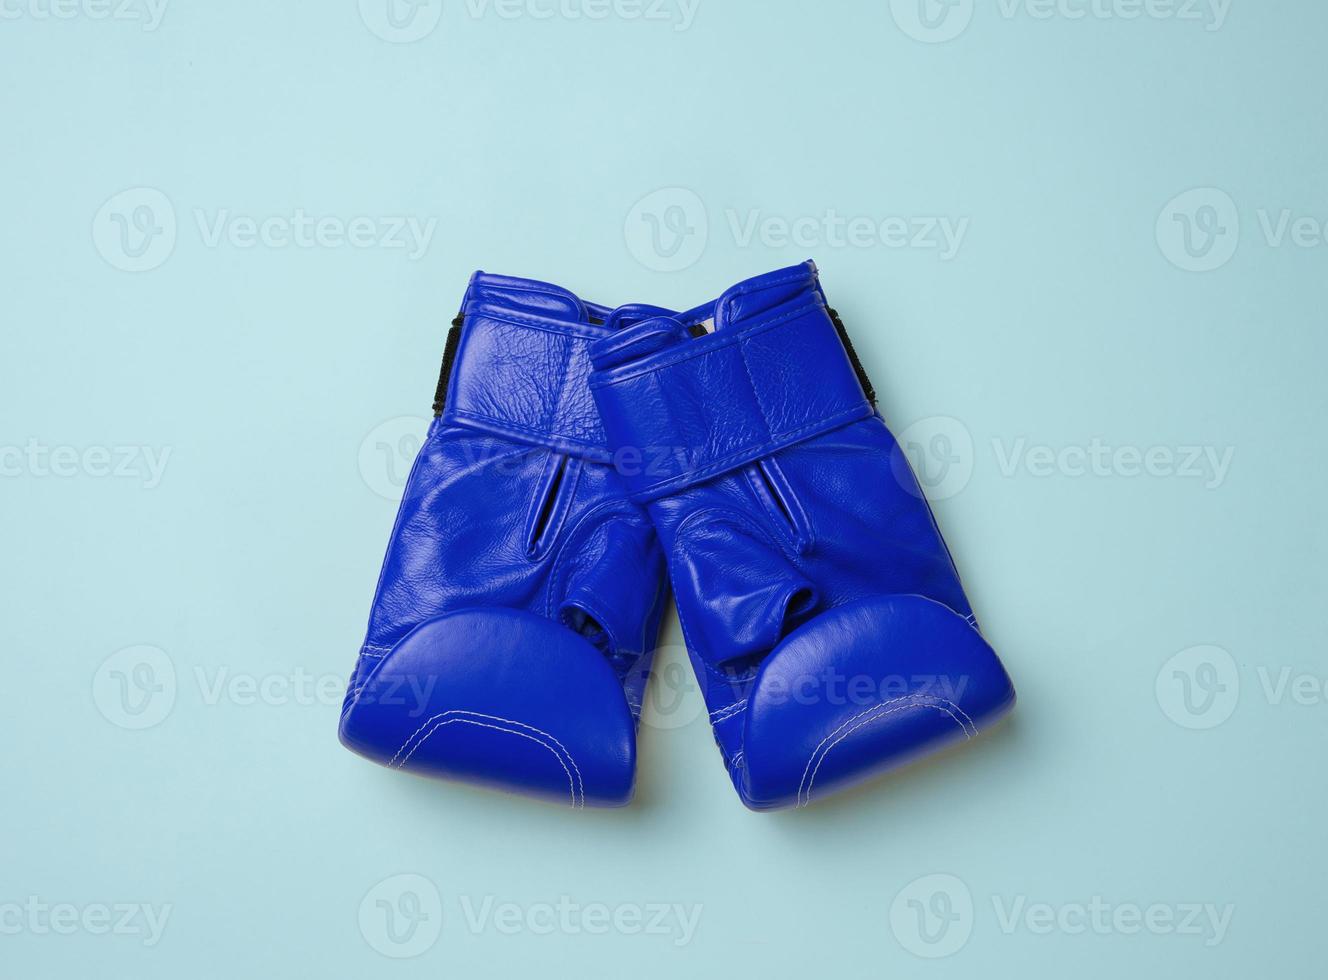 Blue leather boxing gloves on a blue background. Sports equipment, top view photo